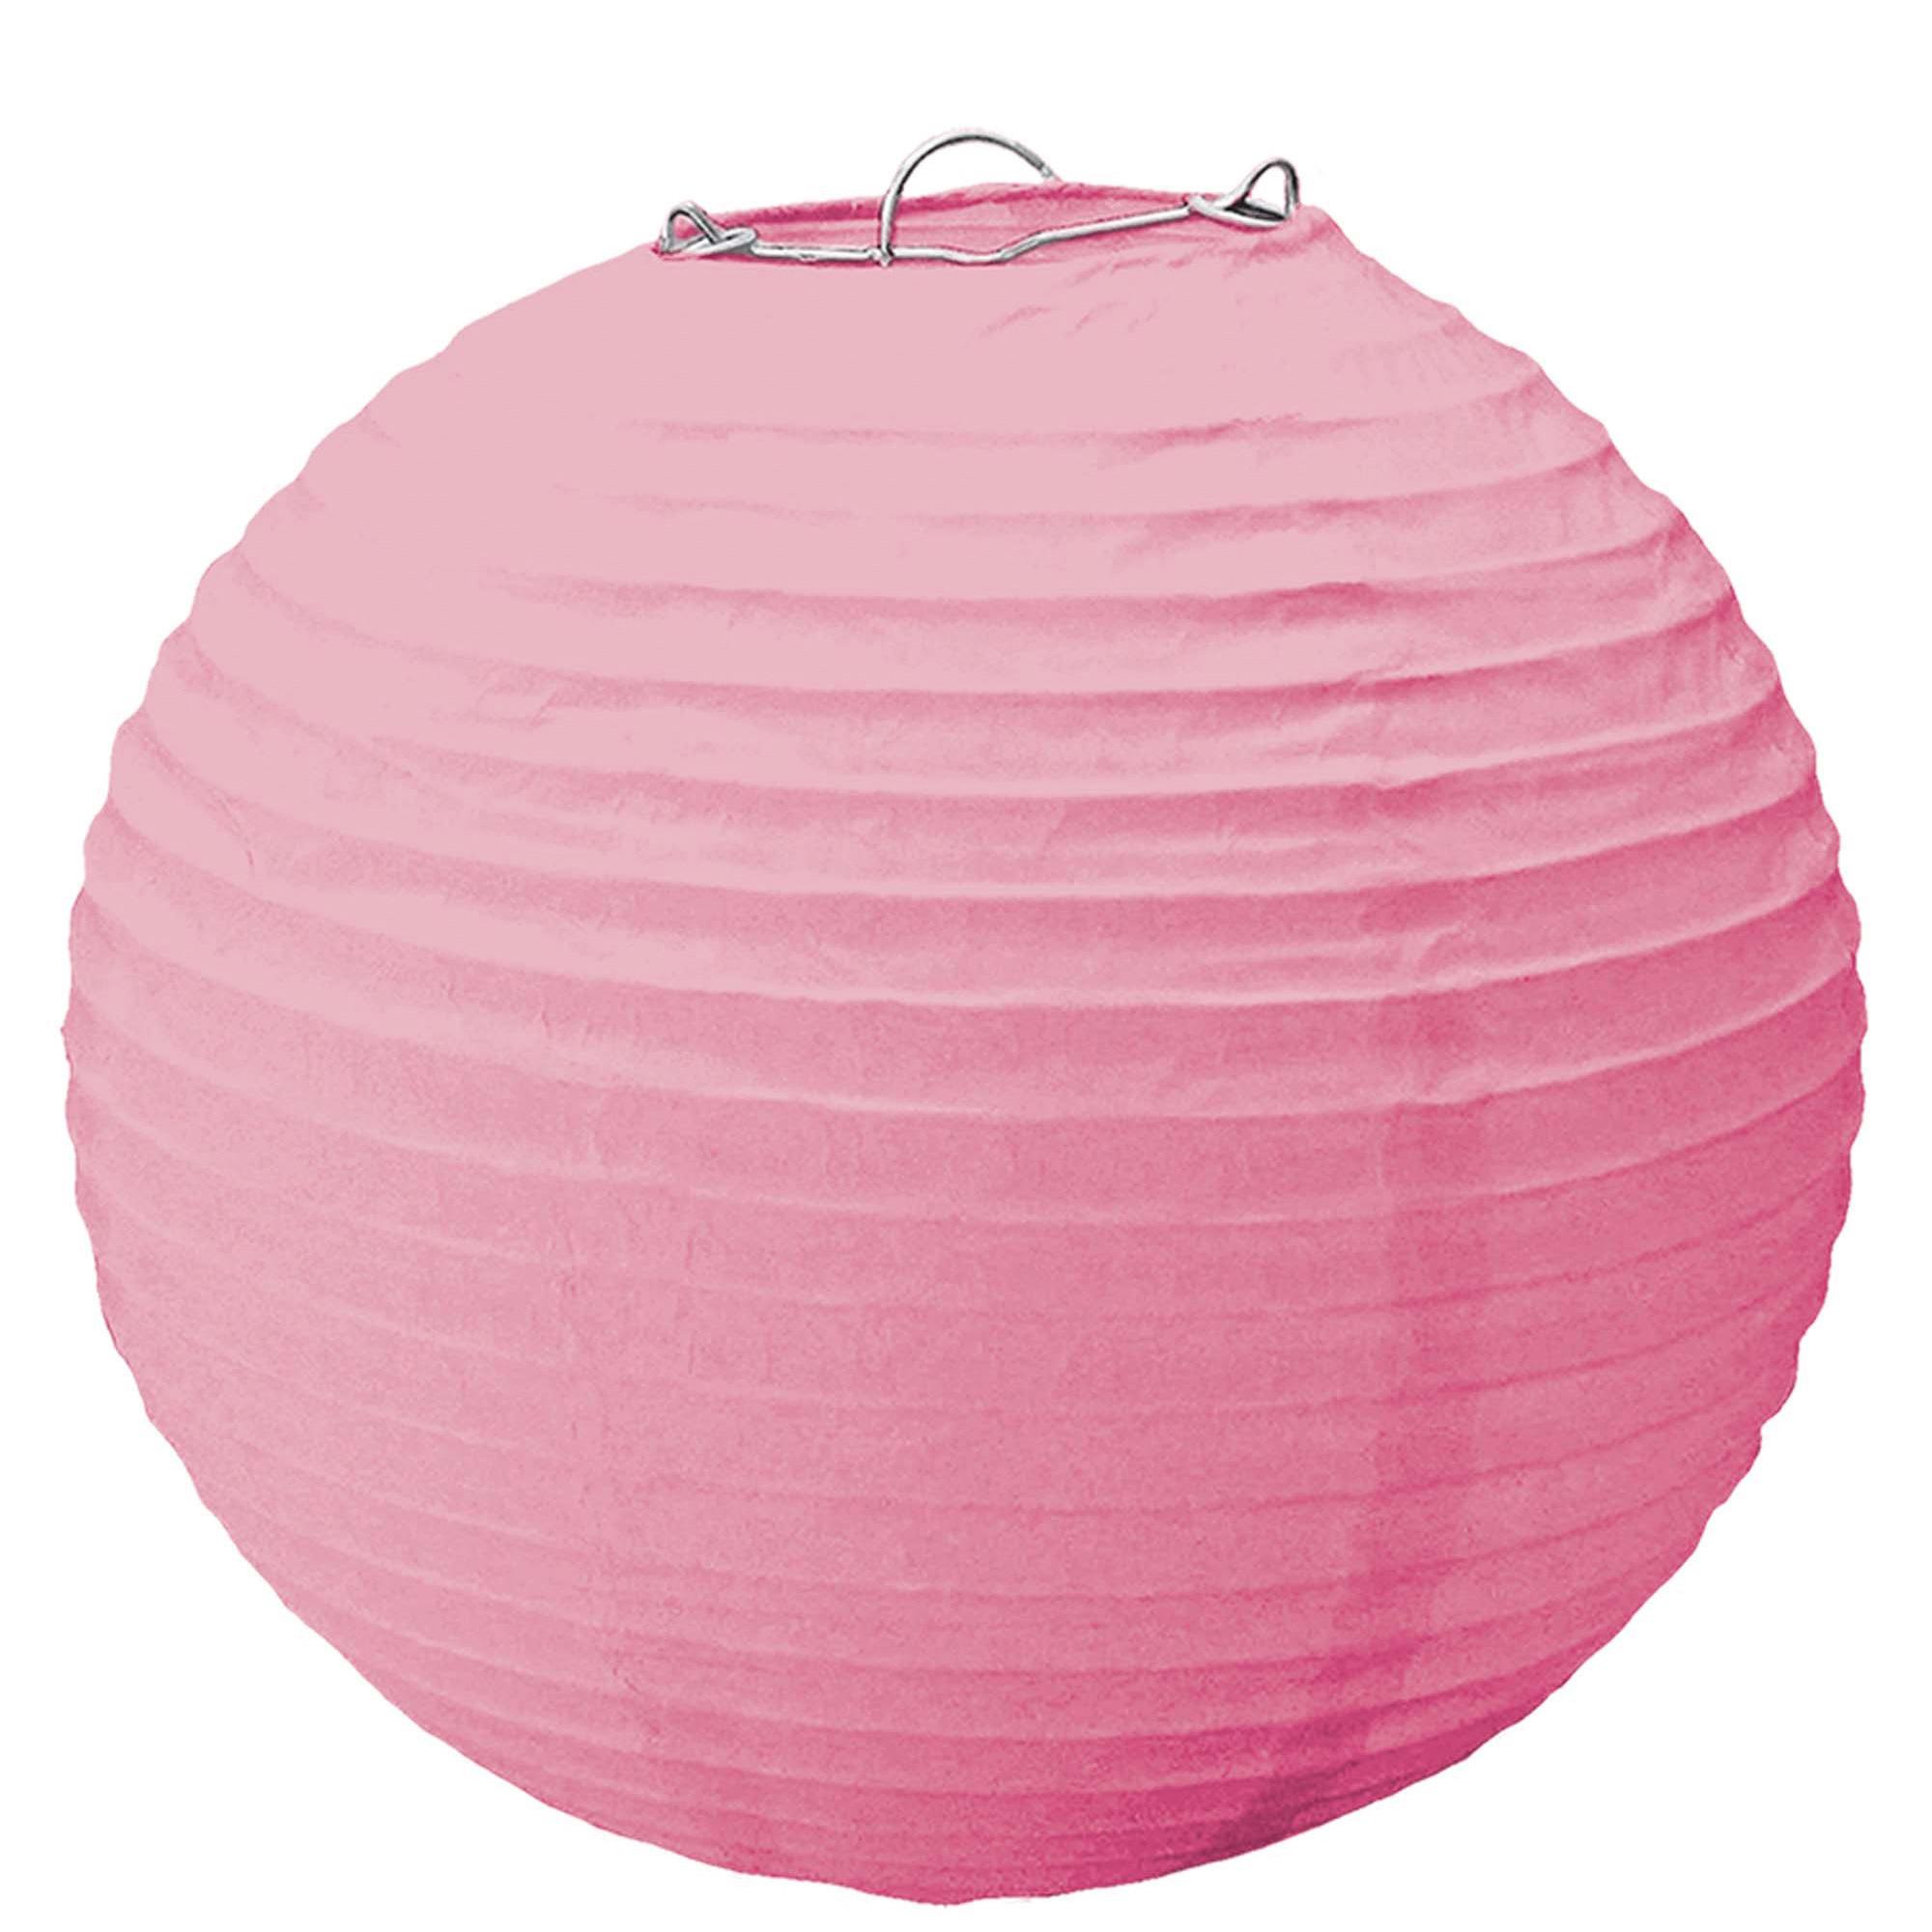 New Pink Paper Lantern With Metal Frame 15.50in Decorations - Party Centre